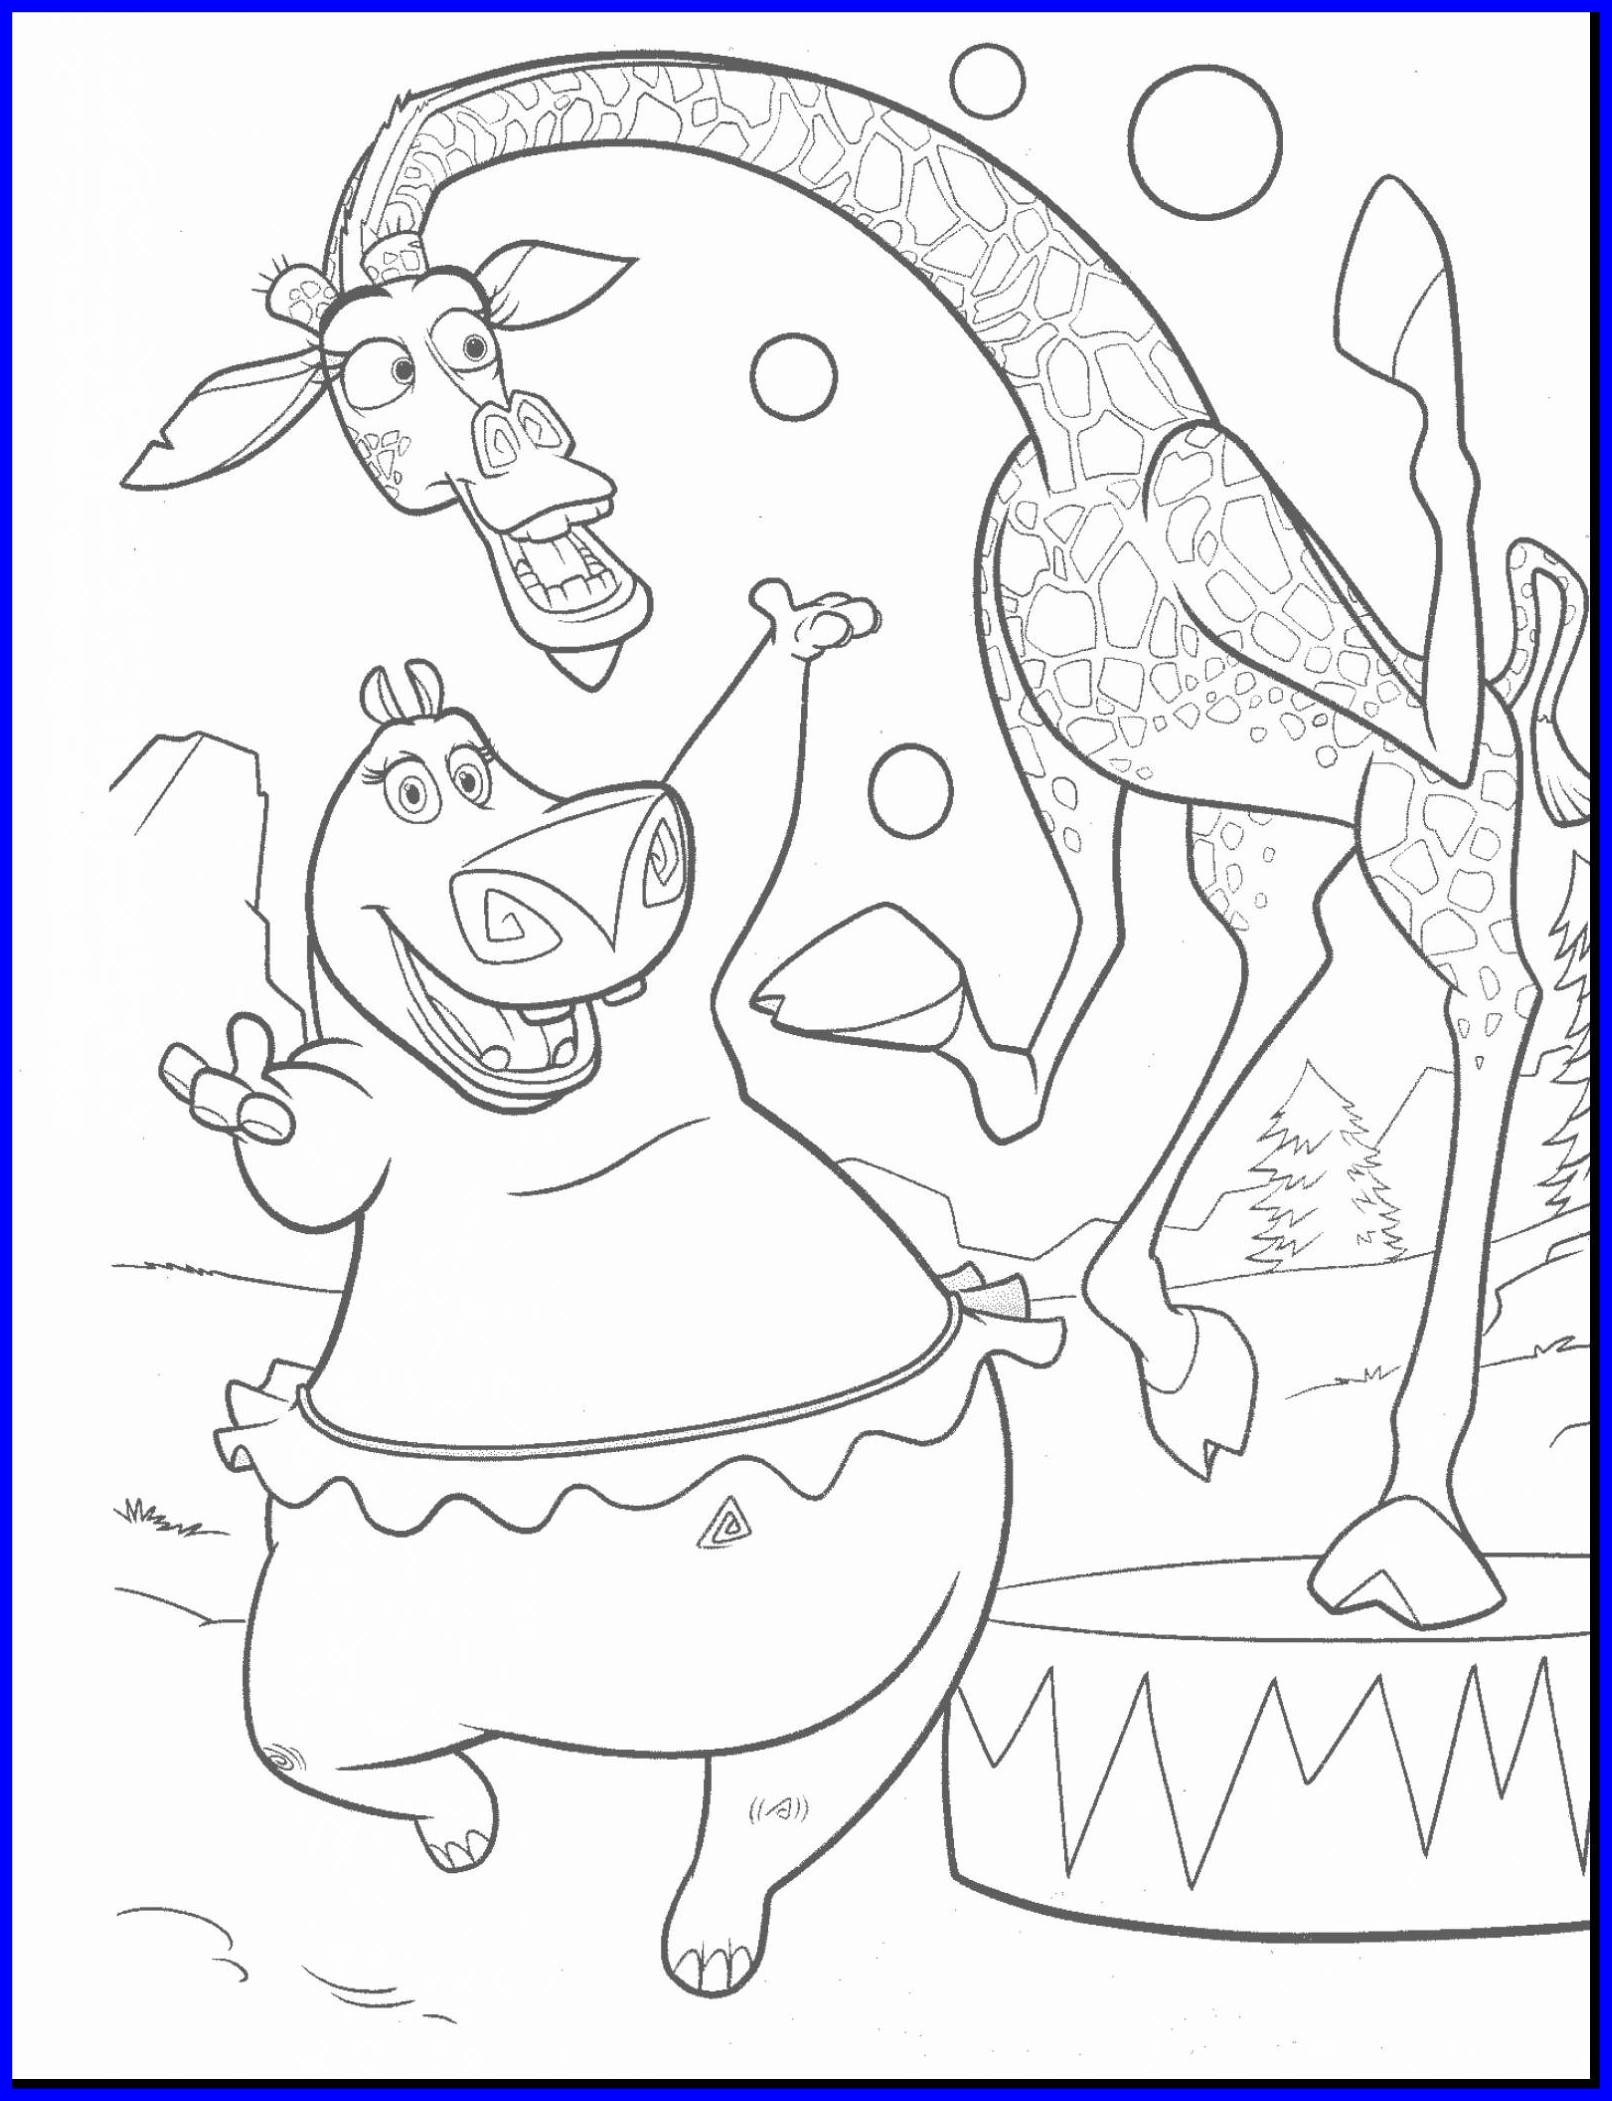 27+ Exclusive Photo of Madagascar Coloring Pages - albanysinsanity.com